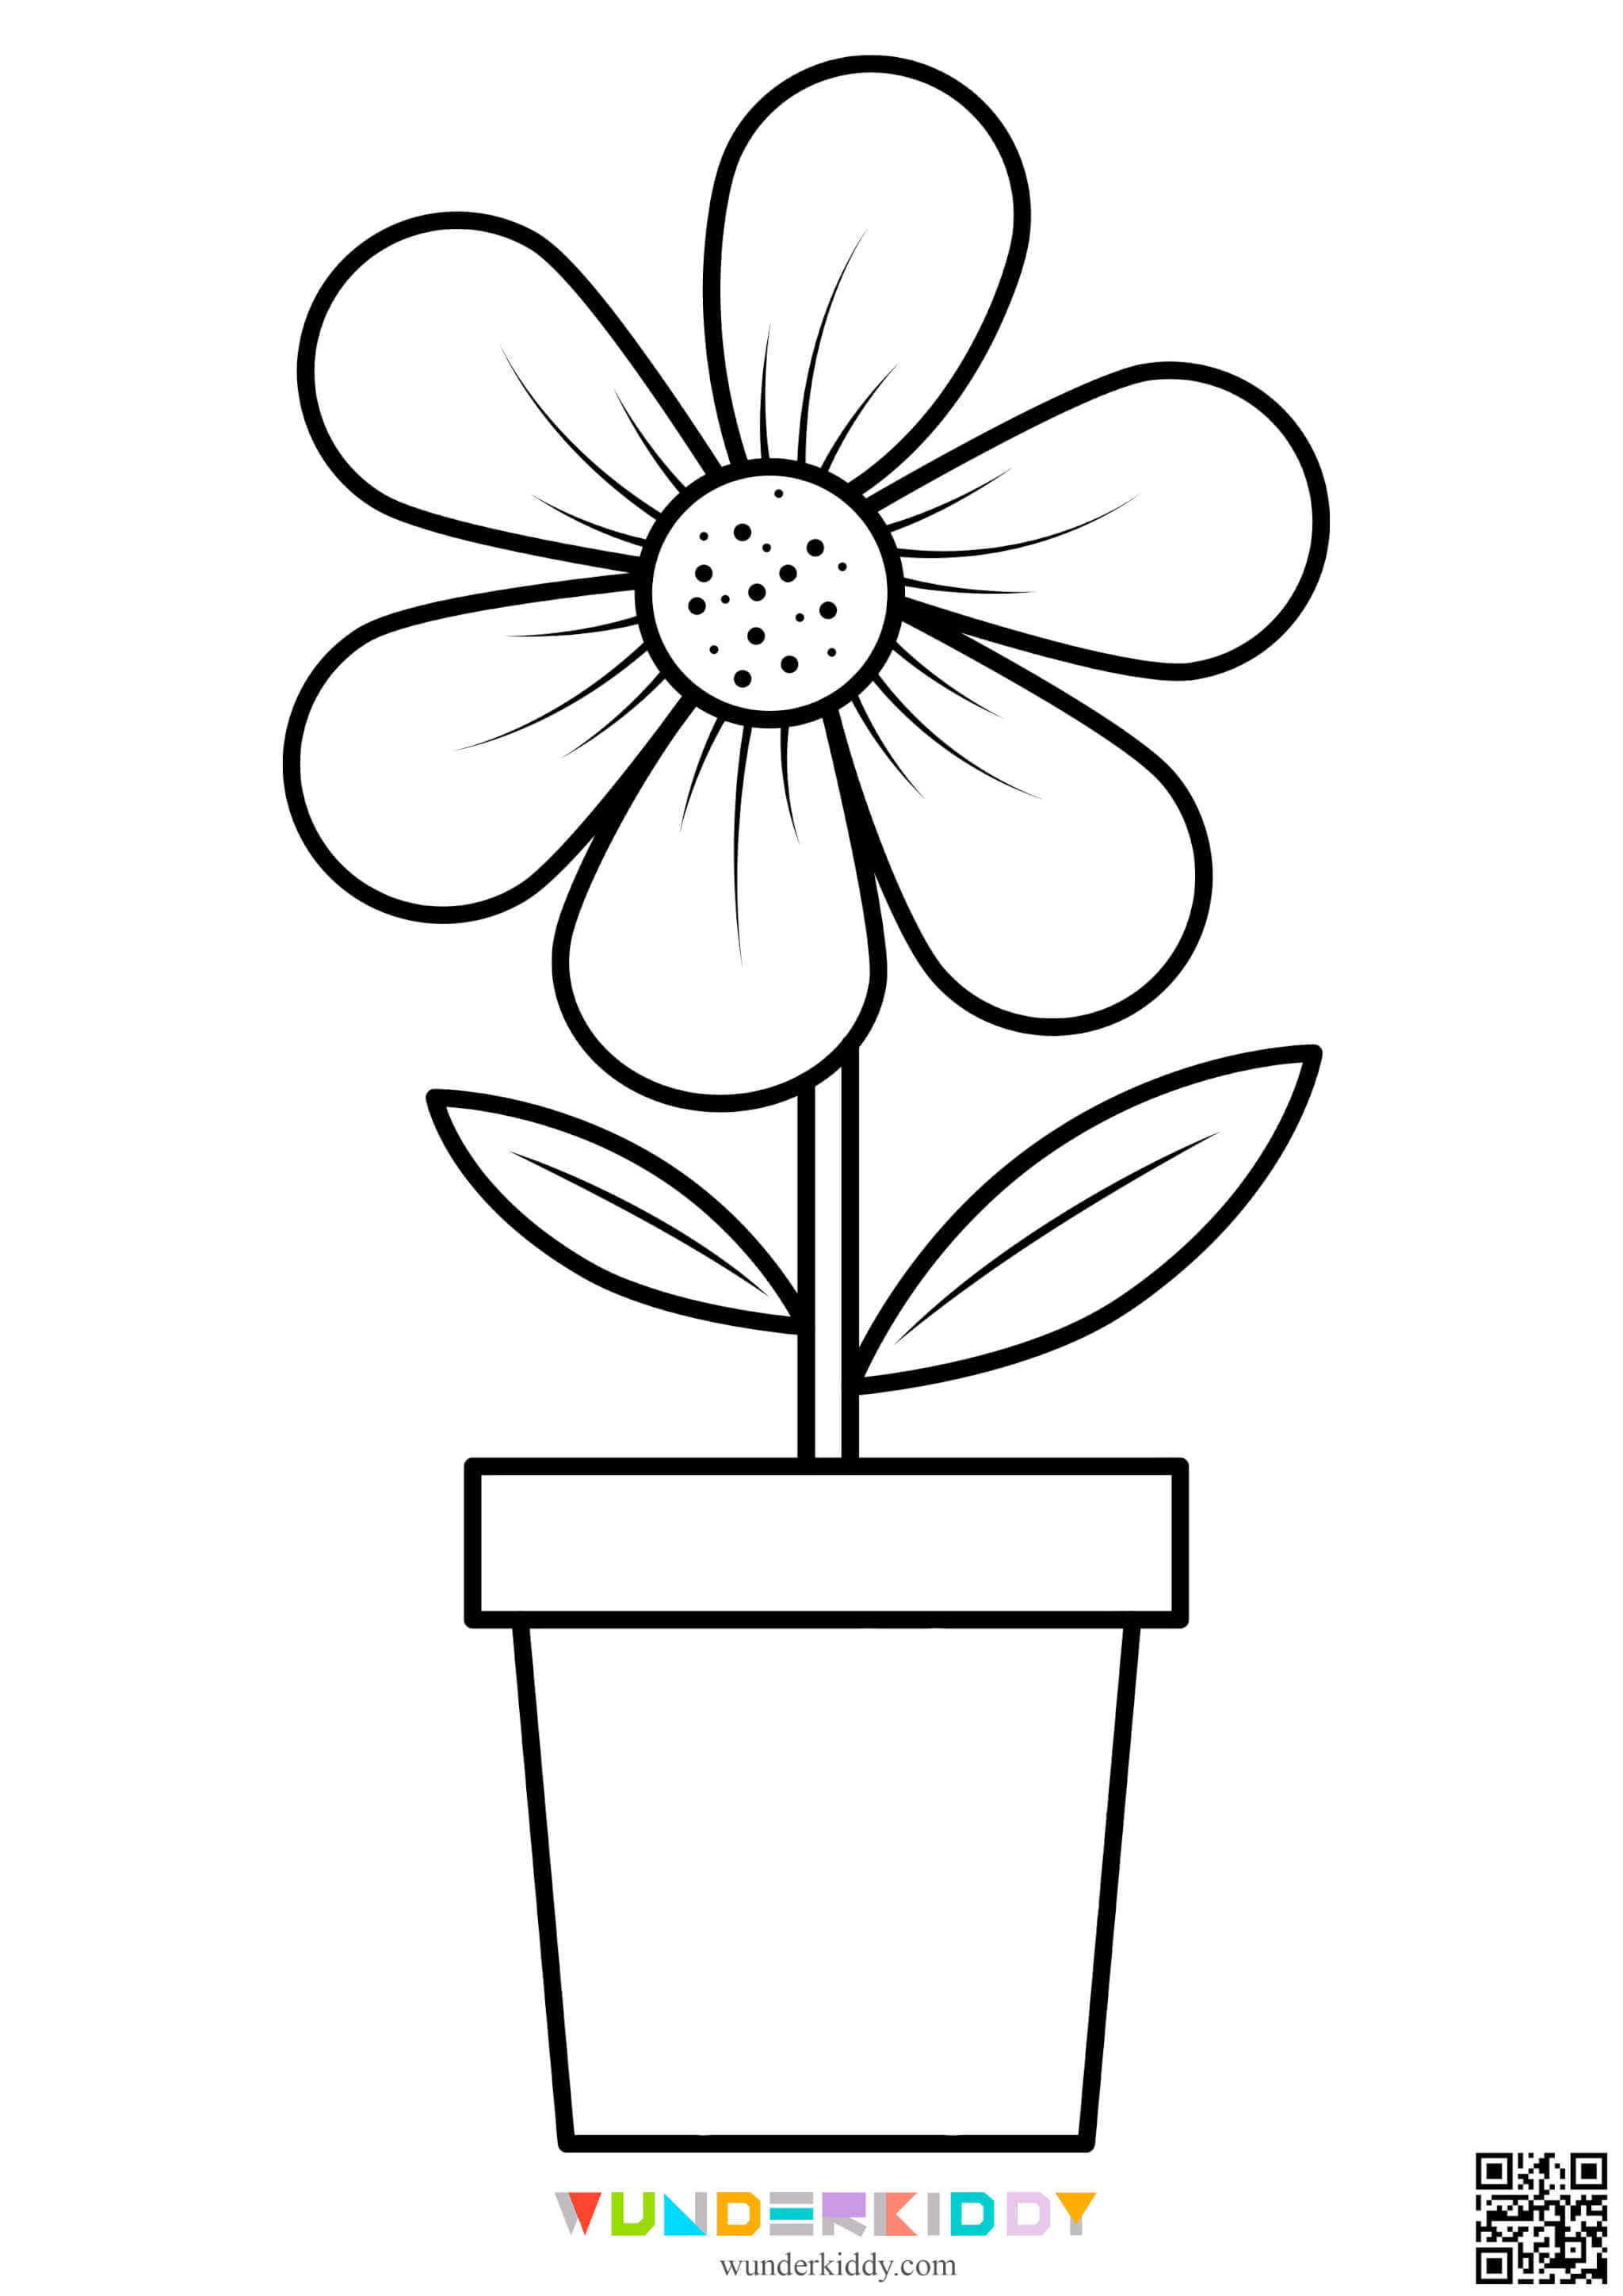 Flower Printable Coloring Pages - Image 3